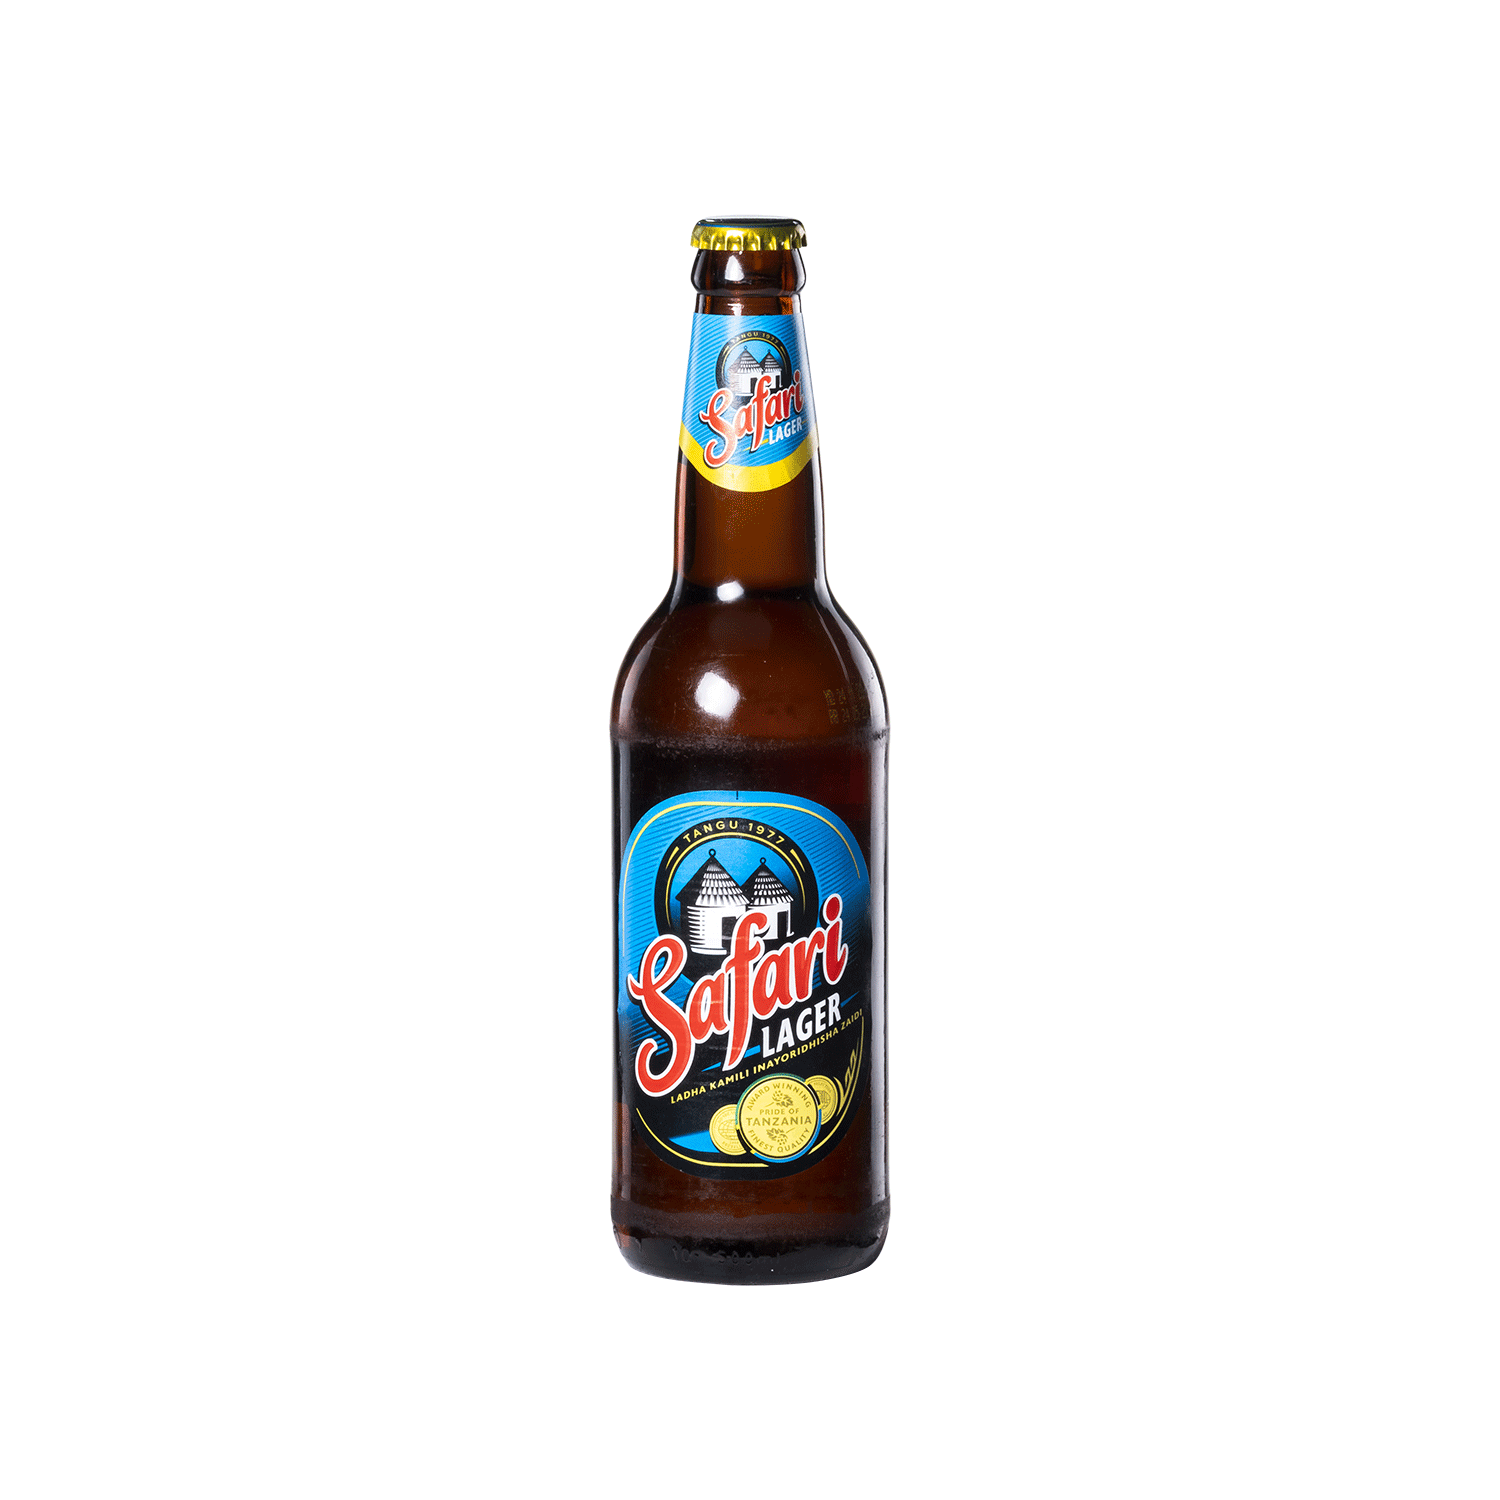 Safari Lager - Silver Quality Award 2021 from Monde Selection